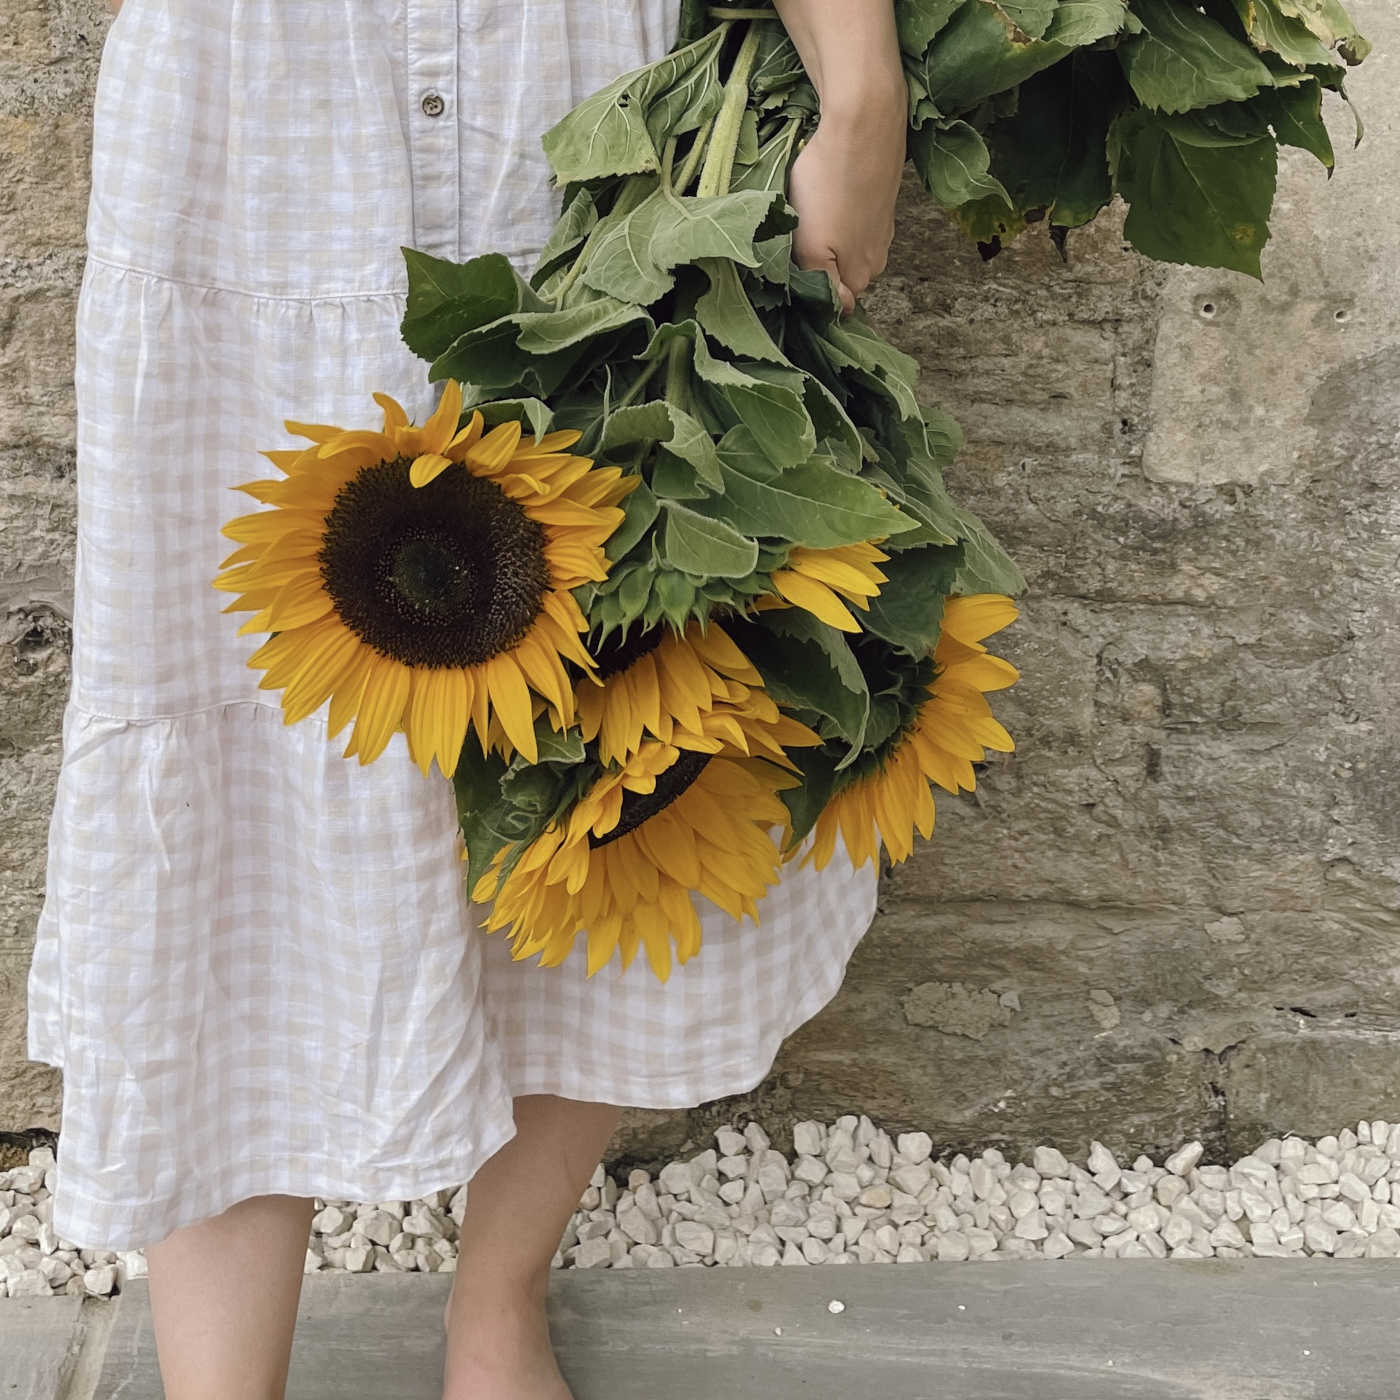 Holding sunflowers against stone wall